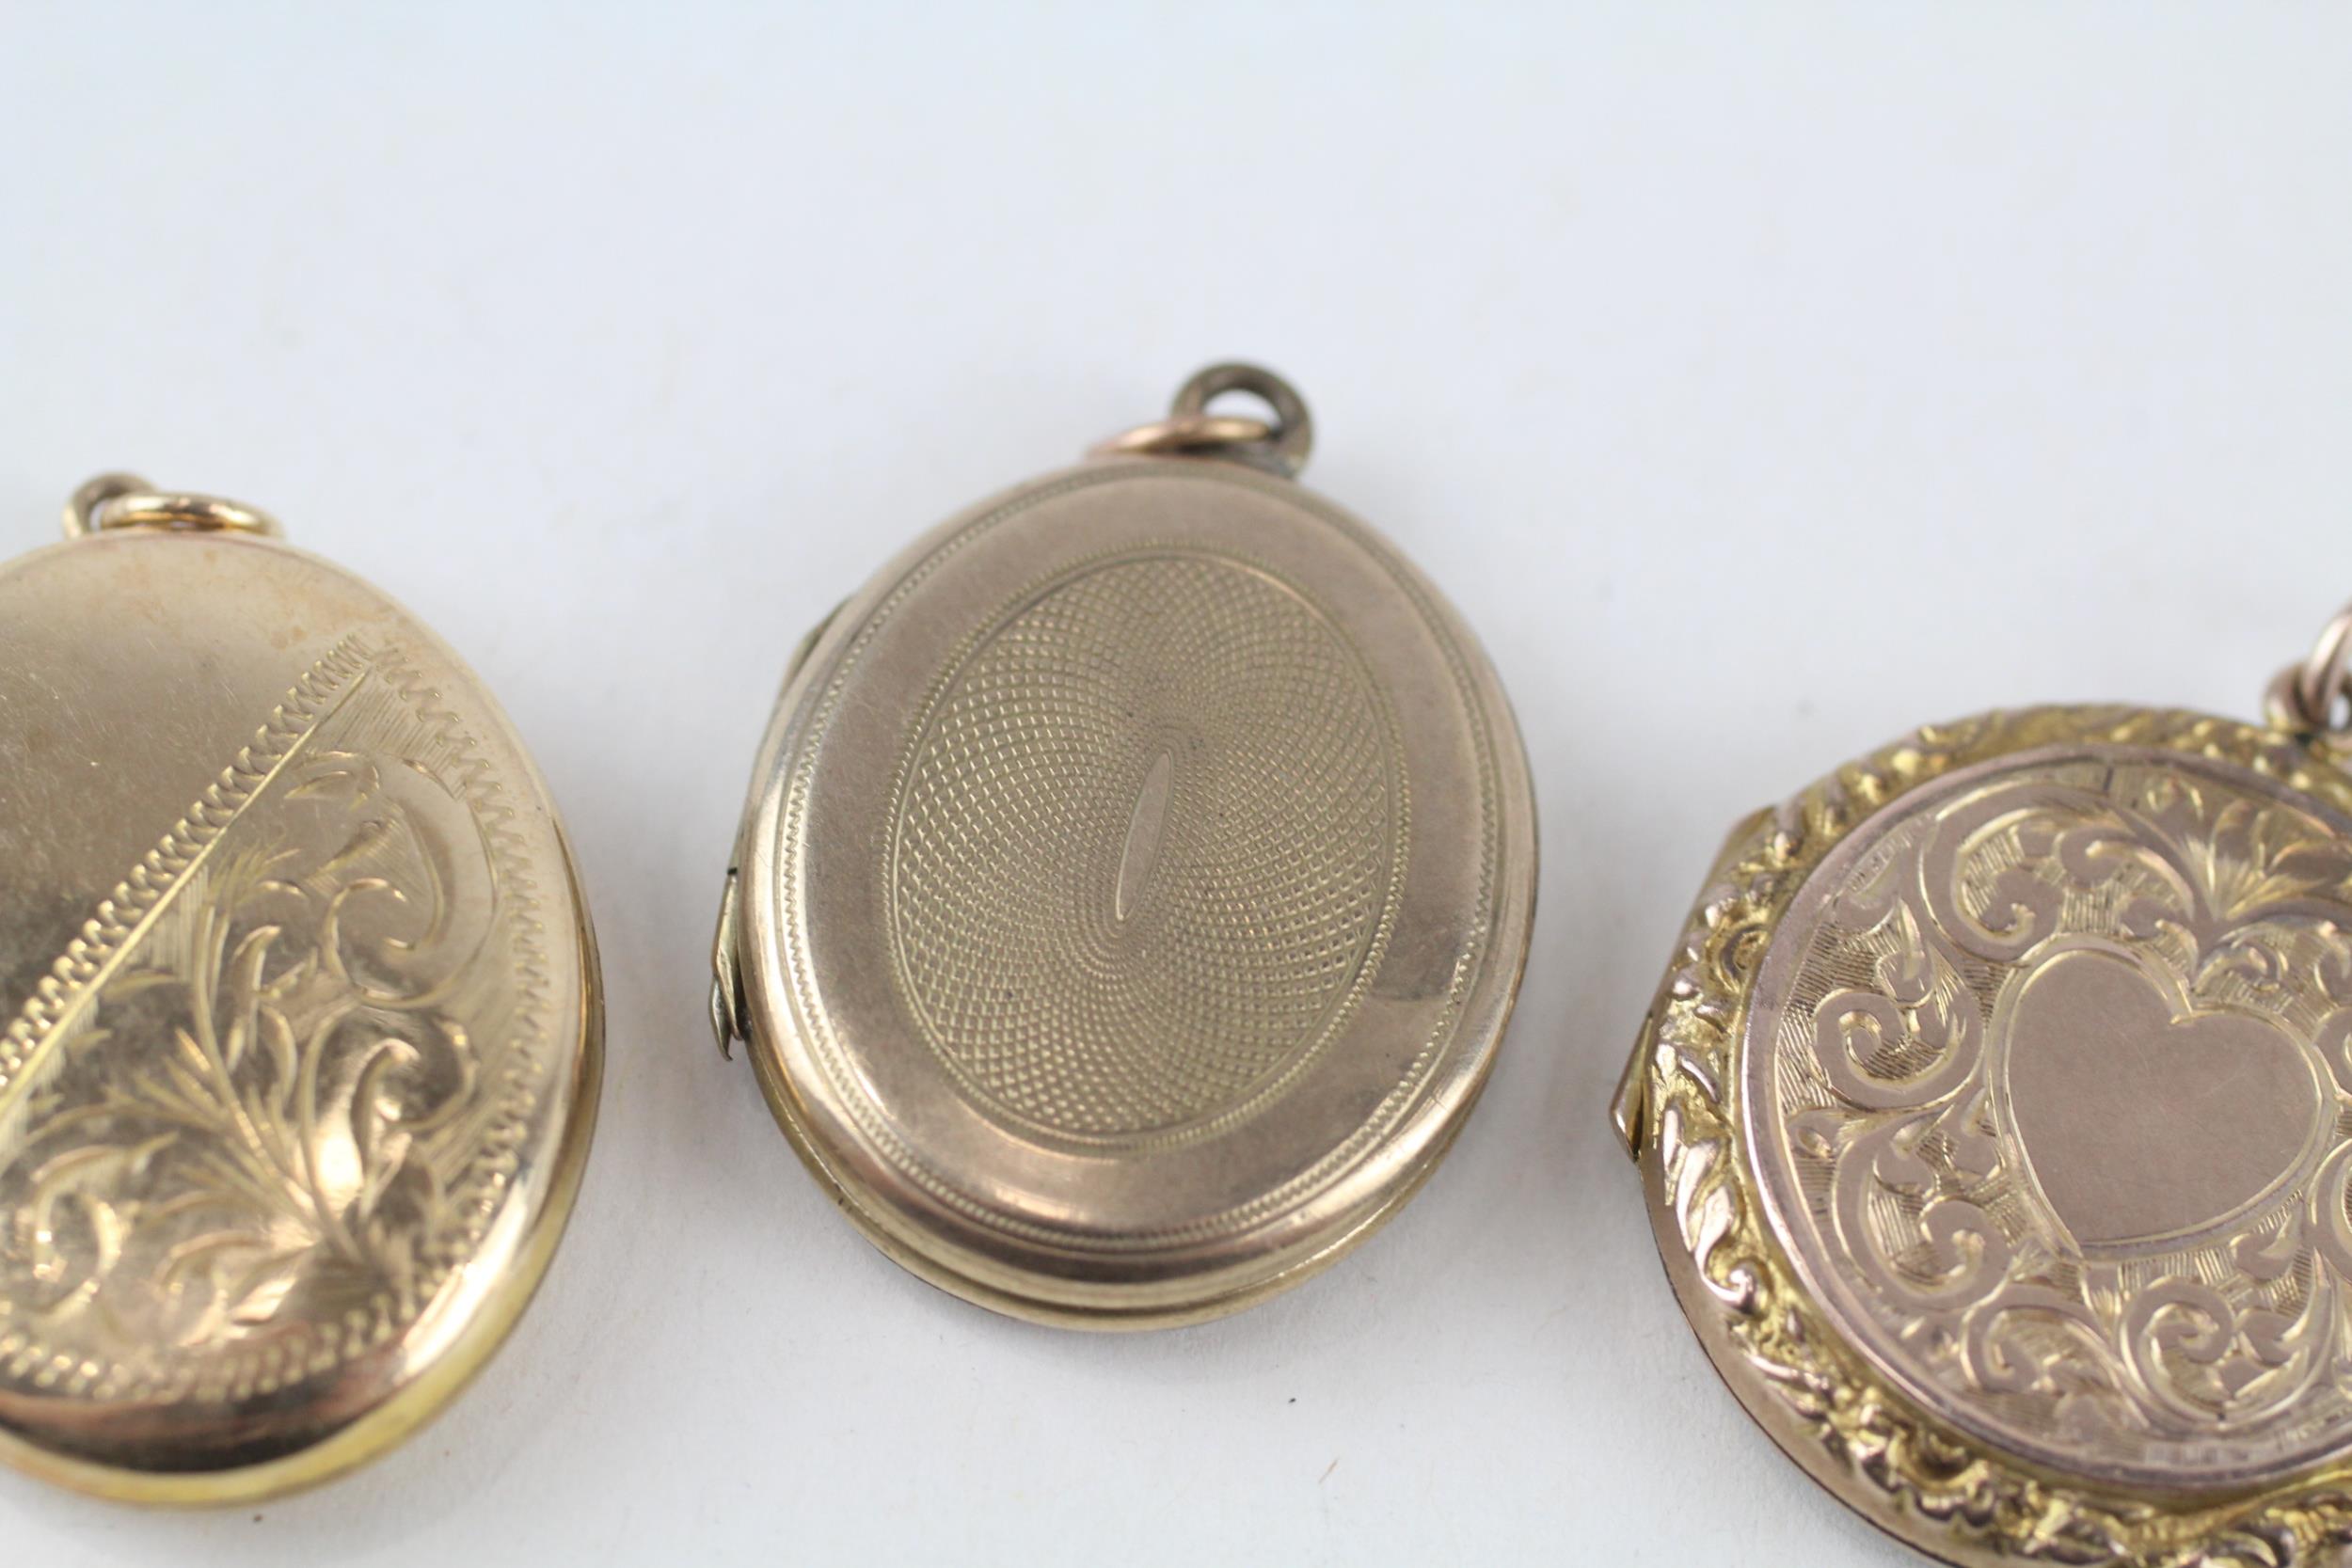 3x 9ct gold back & front antique patterned lockets (13.9g) - Image 3 of 4